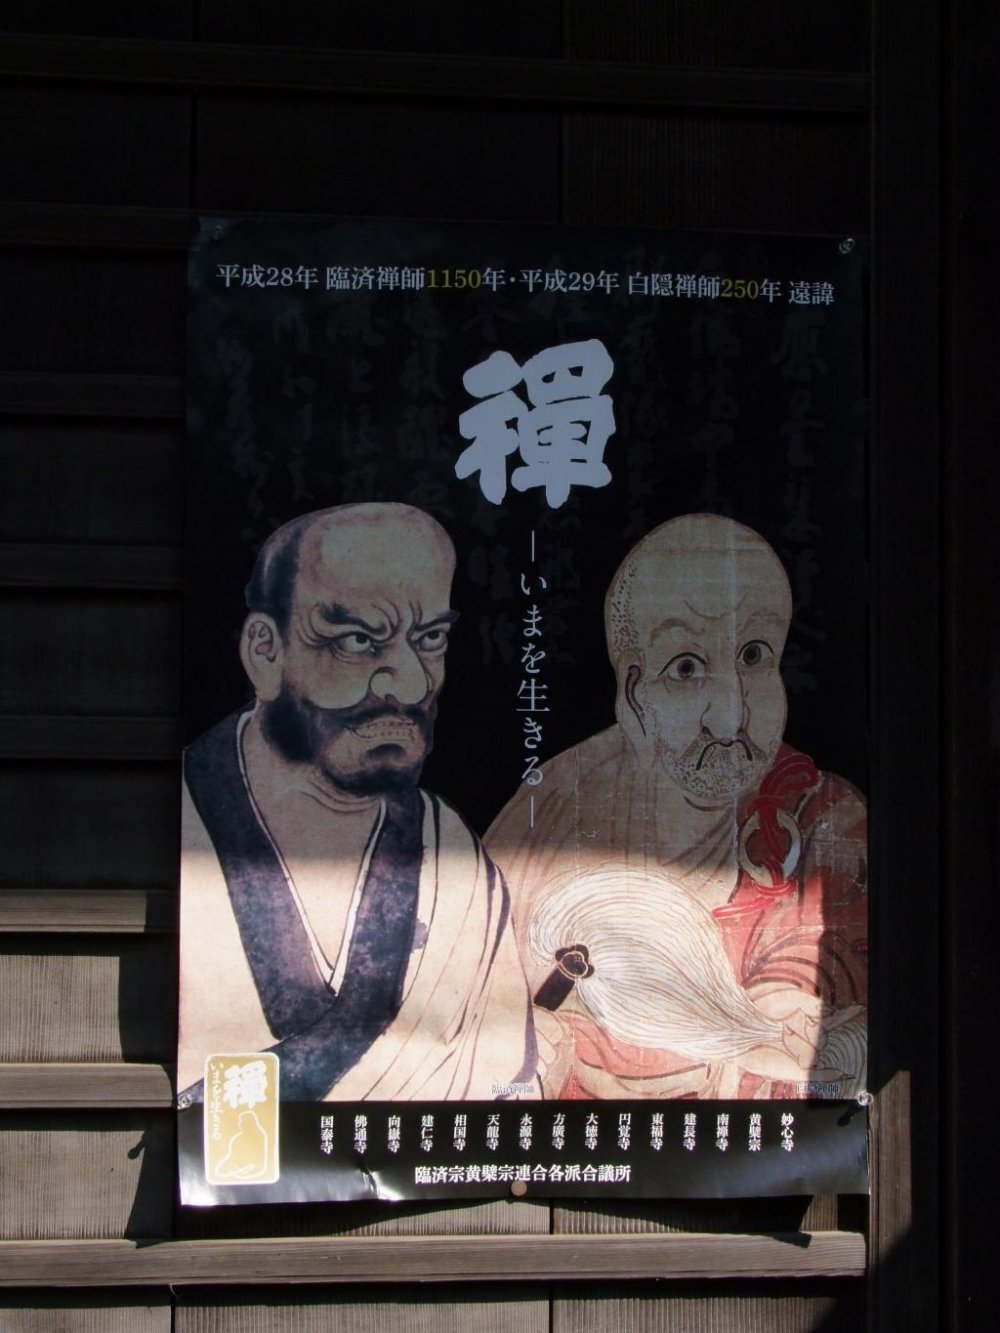 Poster near the temple&#39;s main gate